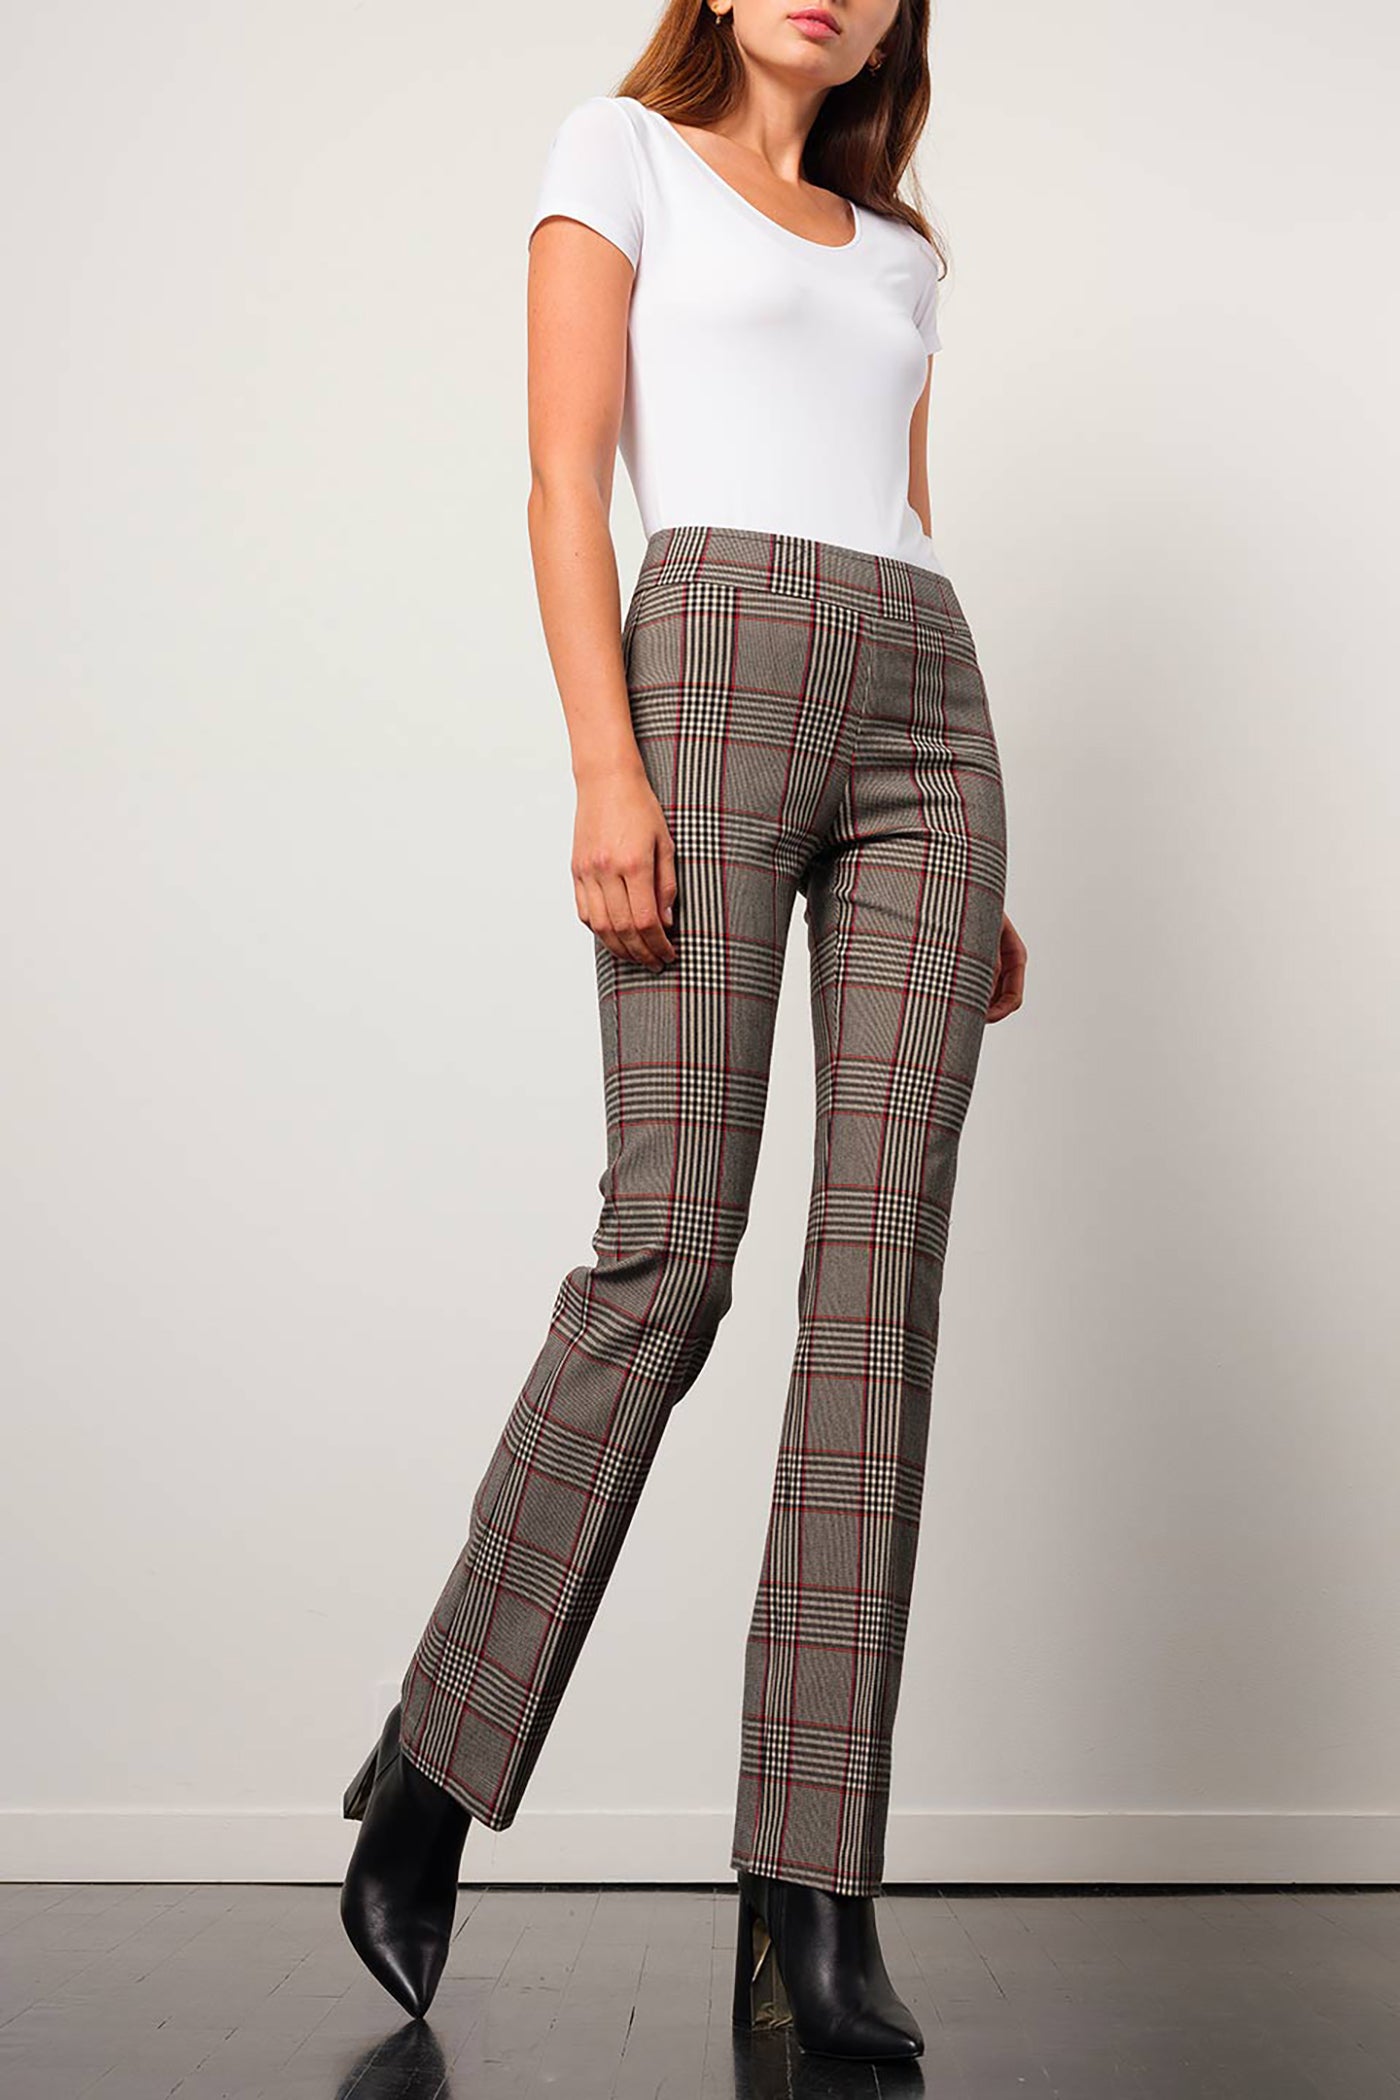 Avenue Montaign Lulu Pants in Plaid –